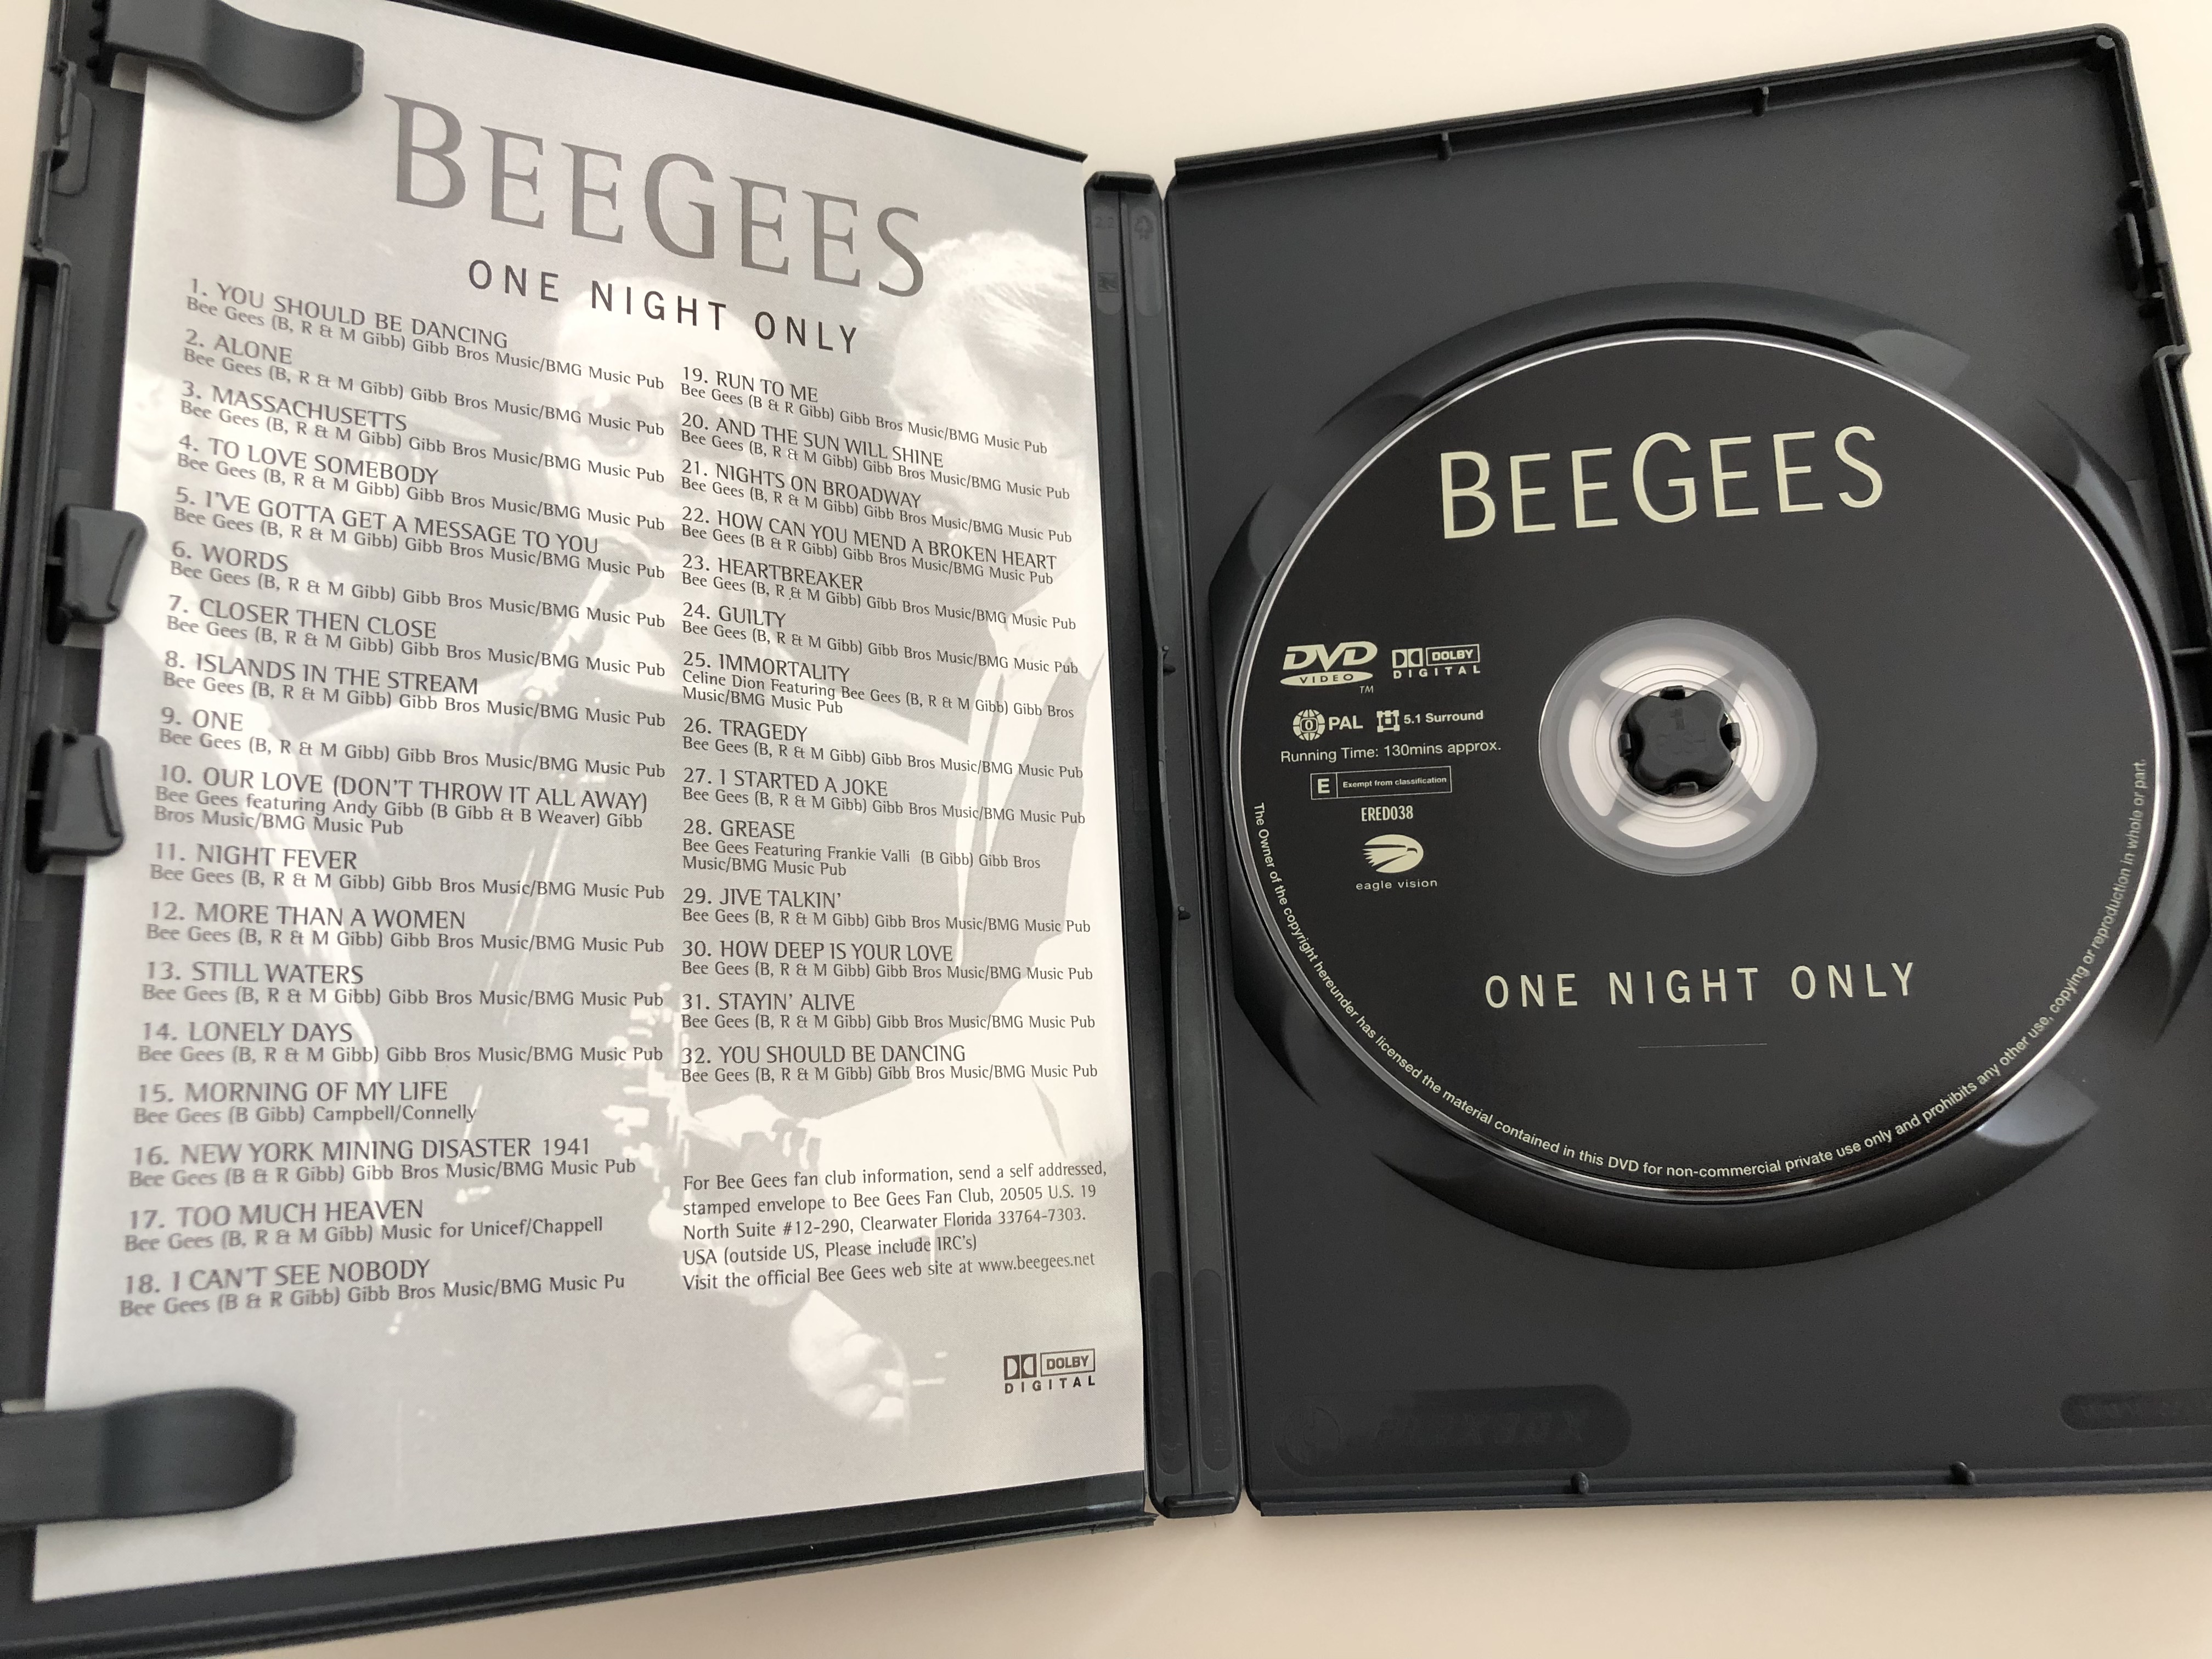 bee-gees-one-night-only-dvd-contains-previously-unreleased-performances-of-islands-in-the-sream-guilty-heartbreaker-ft.-andy-gibb-immortality-ft.-celine-dion-2-.jpg